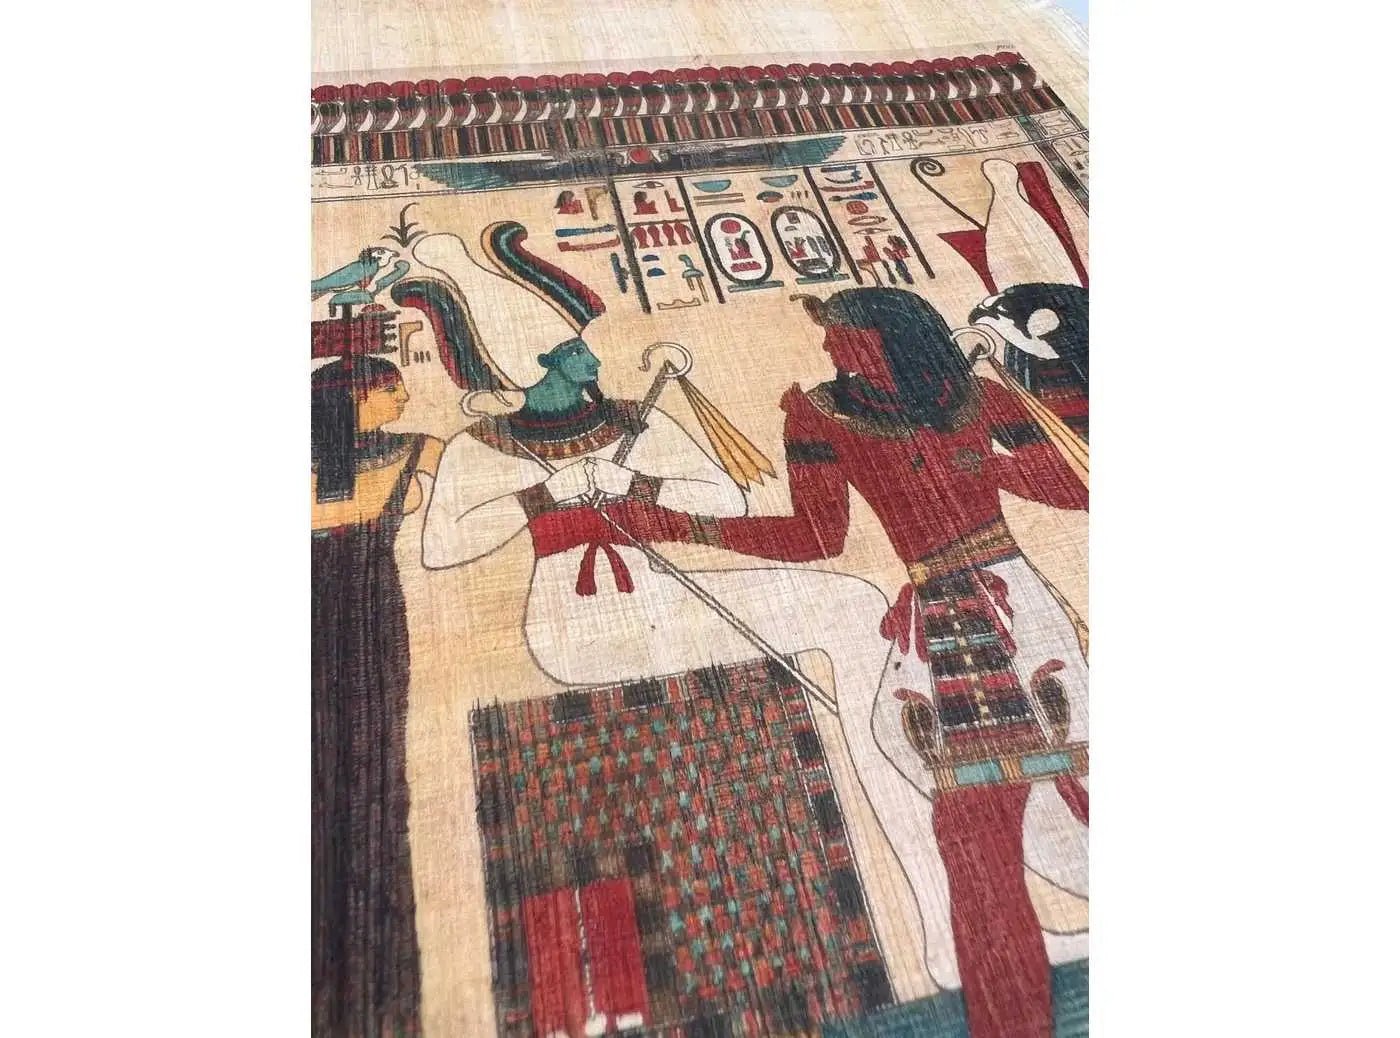 Tableau of Figures, Large as Life, in The Tomb of Psammuthis Illustration from The Kings Tombs in Thebes